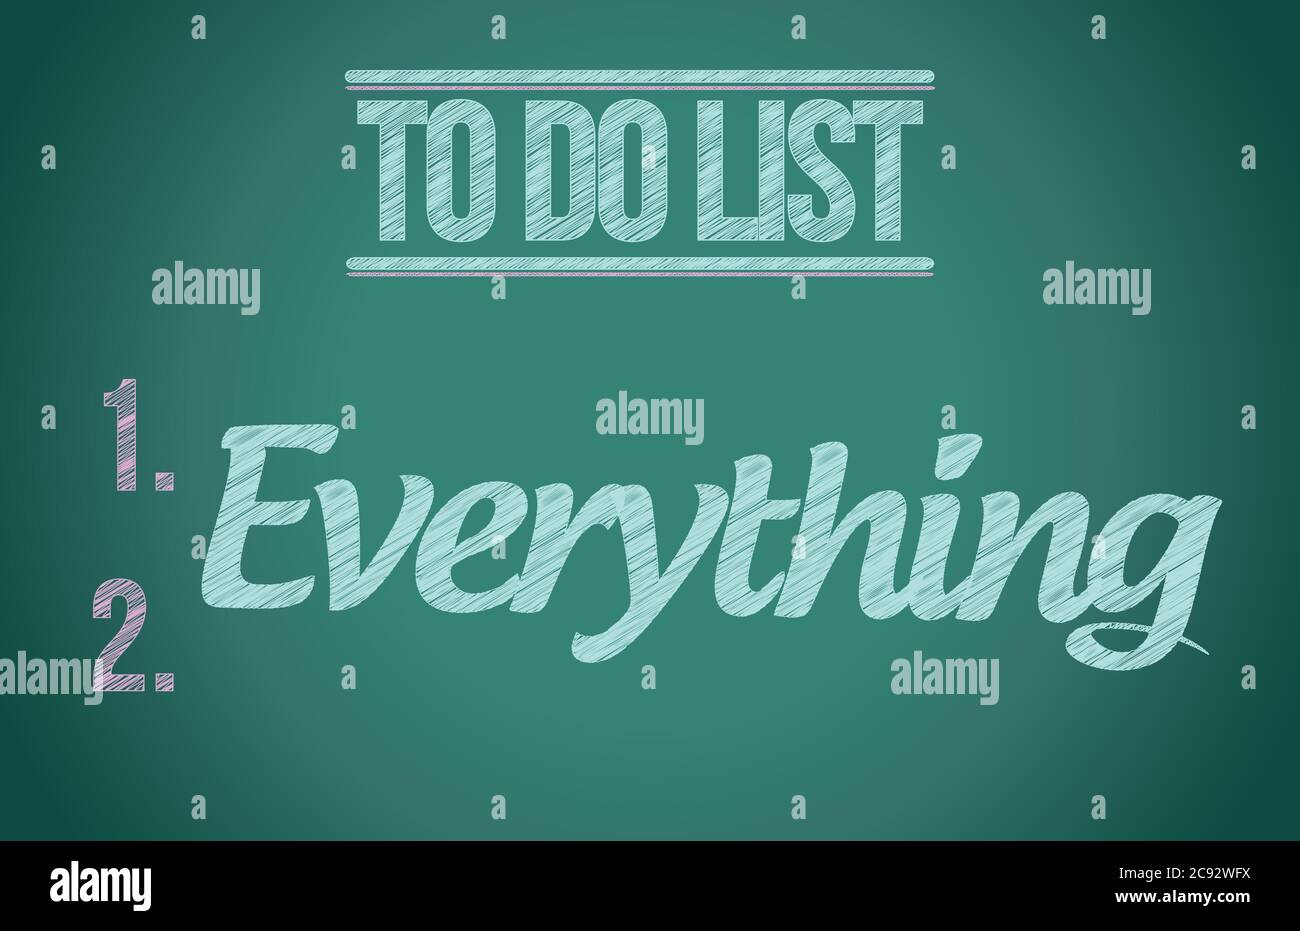 To do everything. to do list illustration design graphic Stock Vector